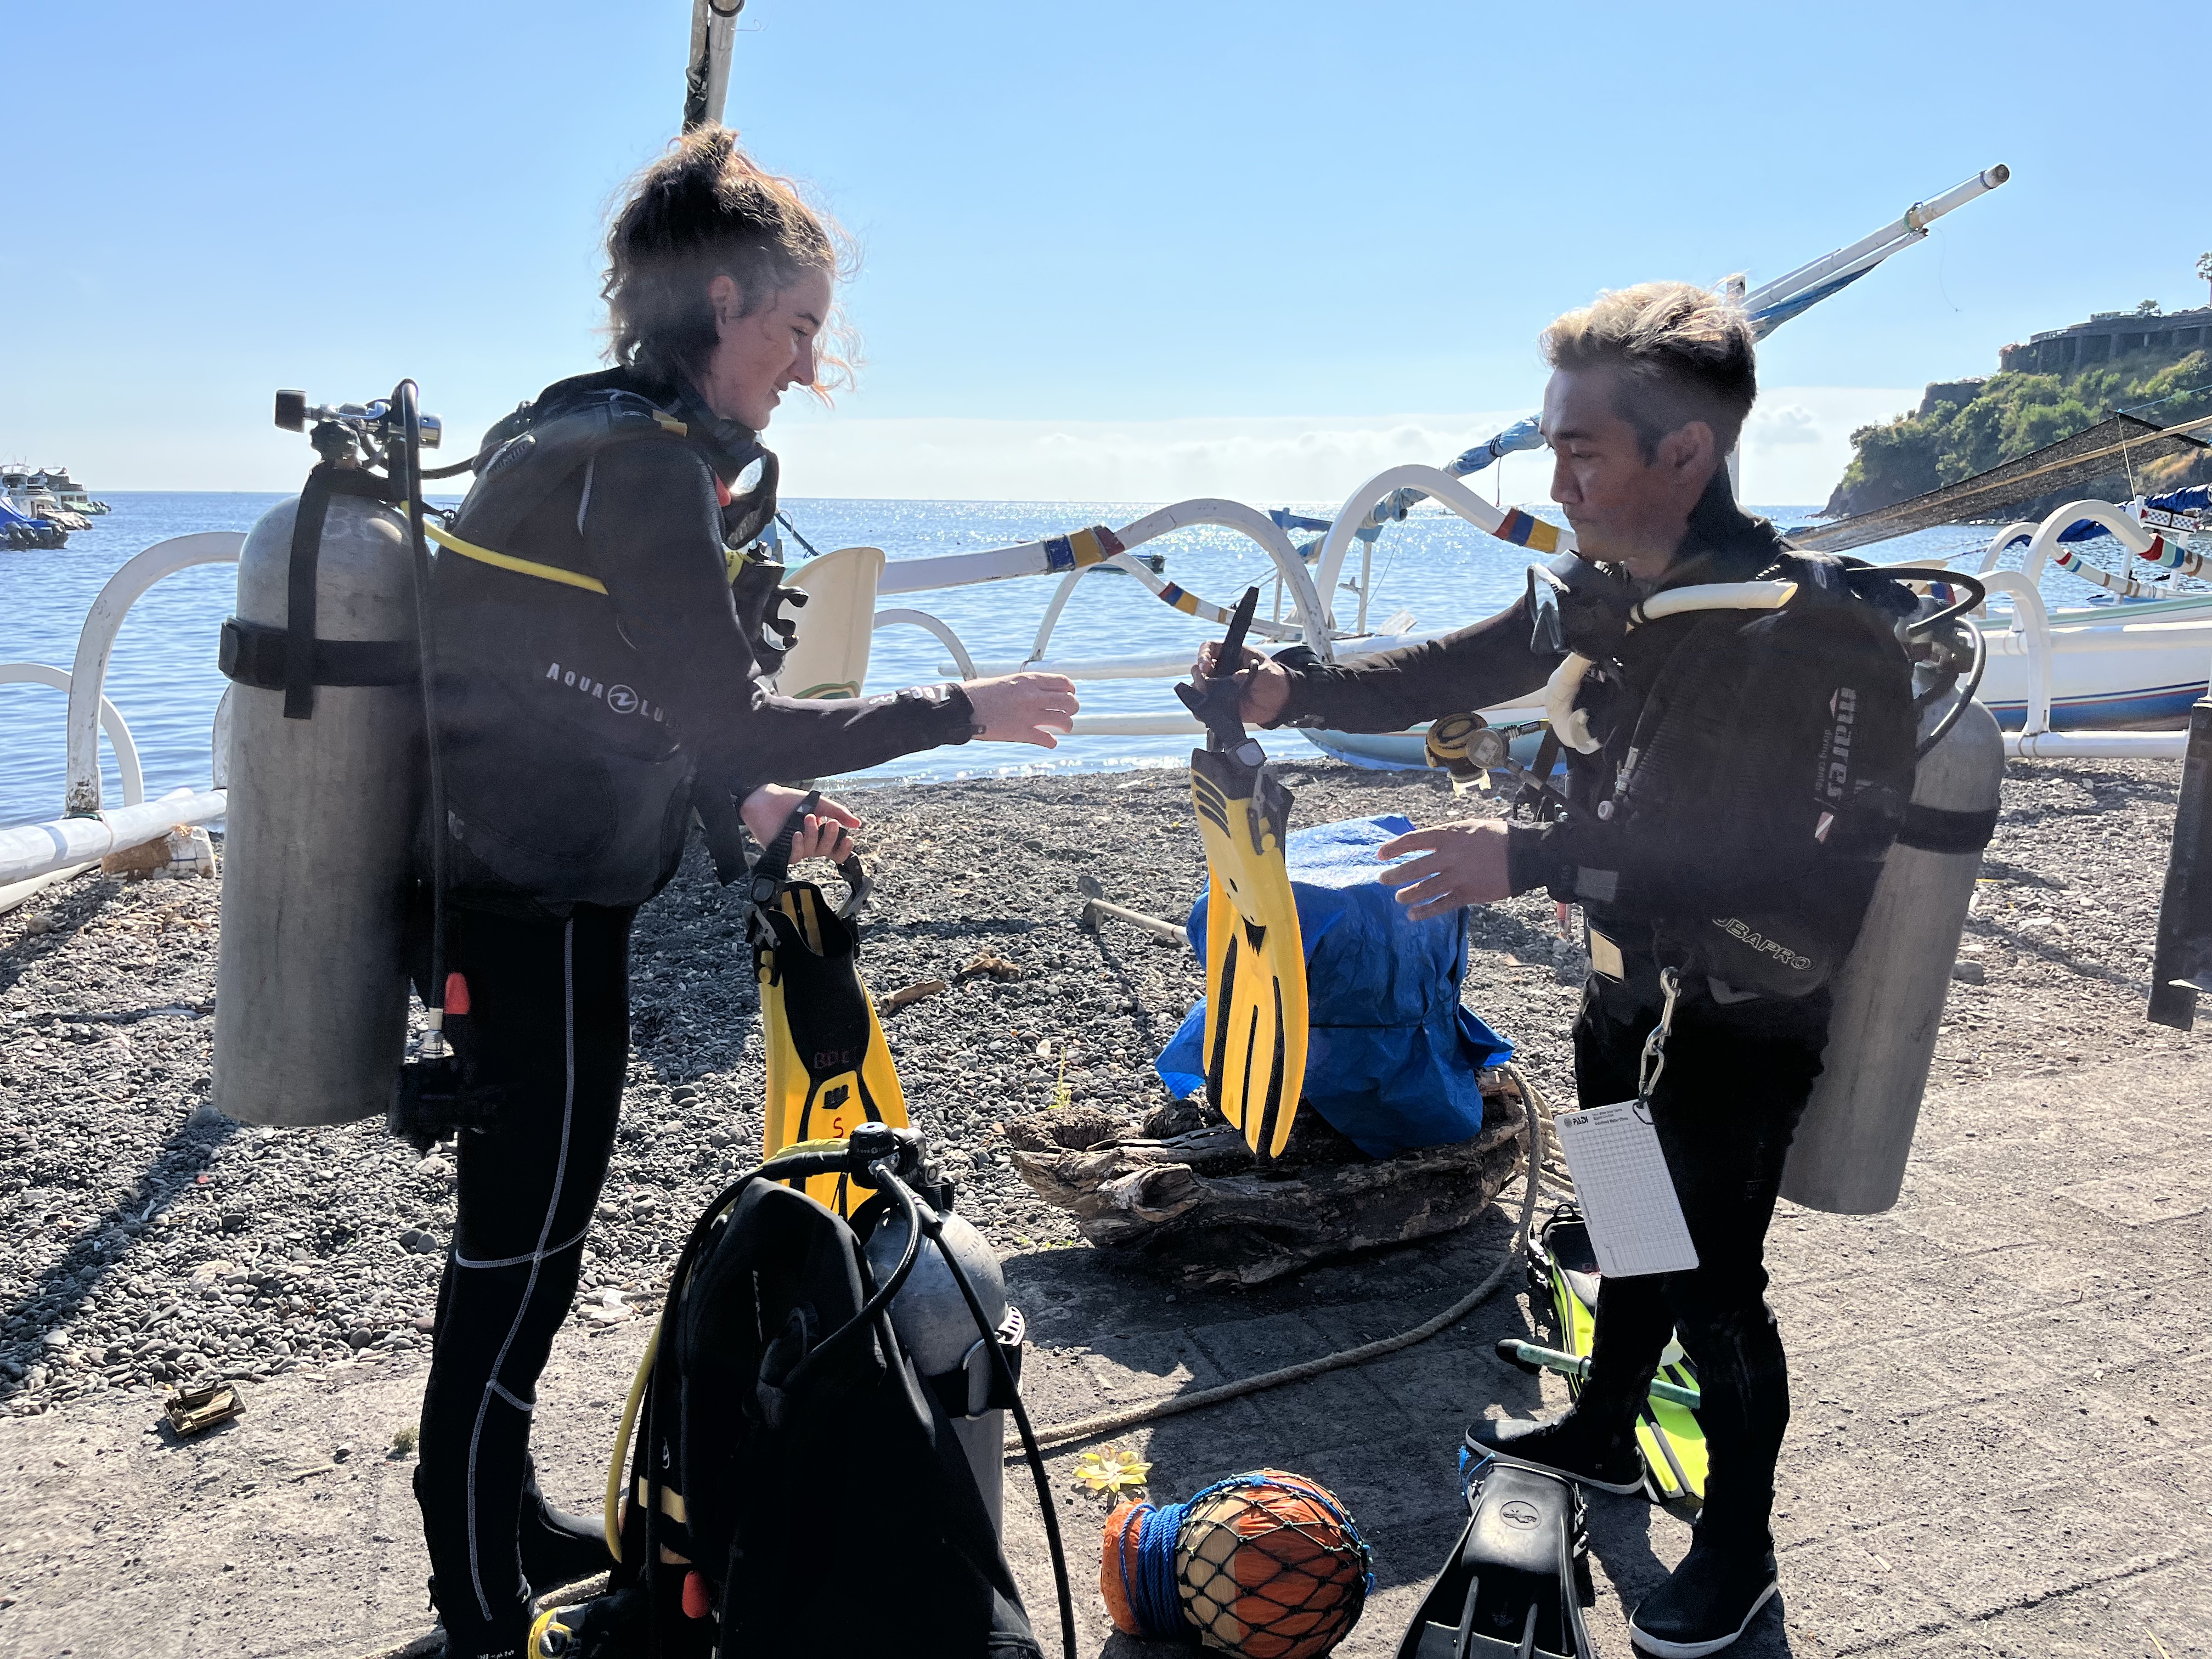 Instructor Gede and student Eloise performing the final check as part of the BWRAF buddy check of the PADI Open Water diver course in Amed, Bali